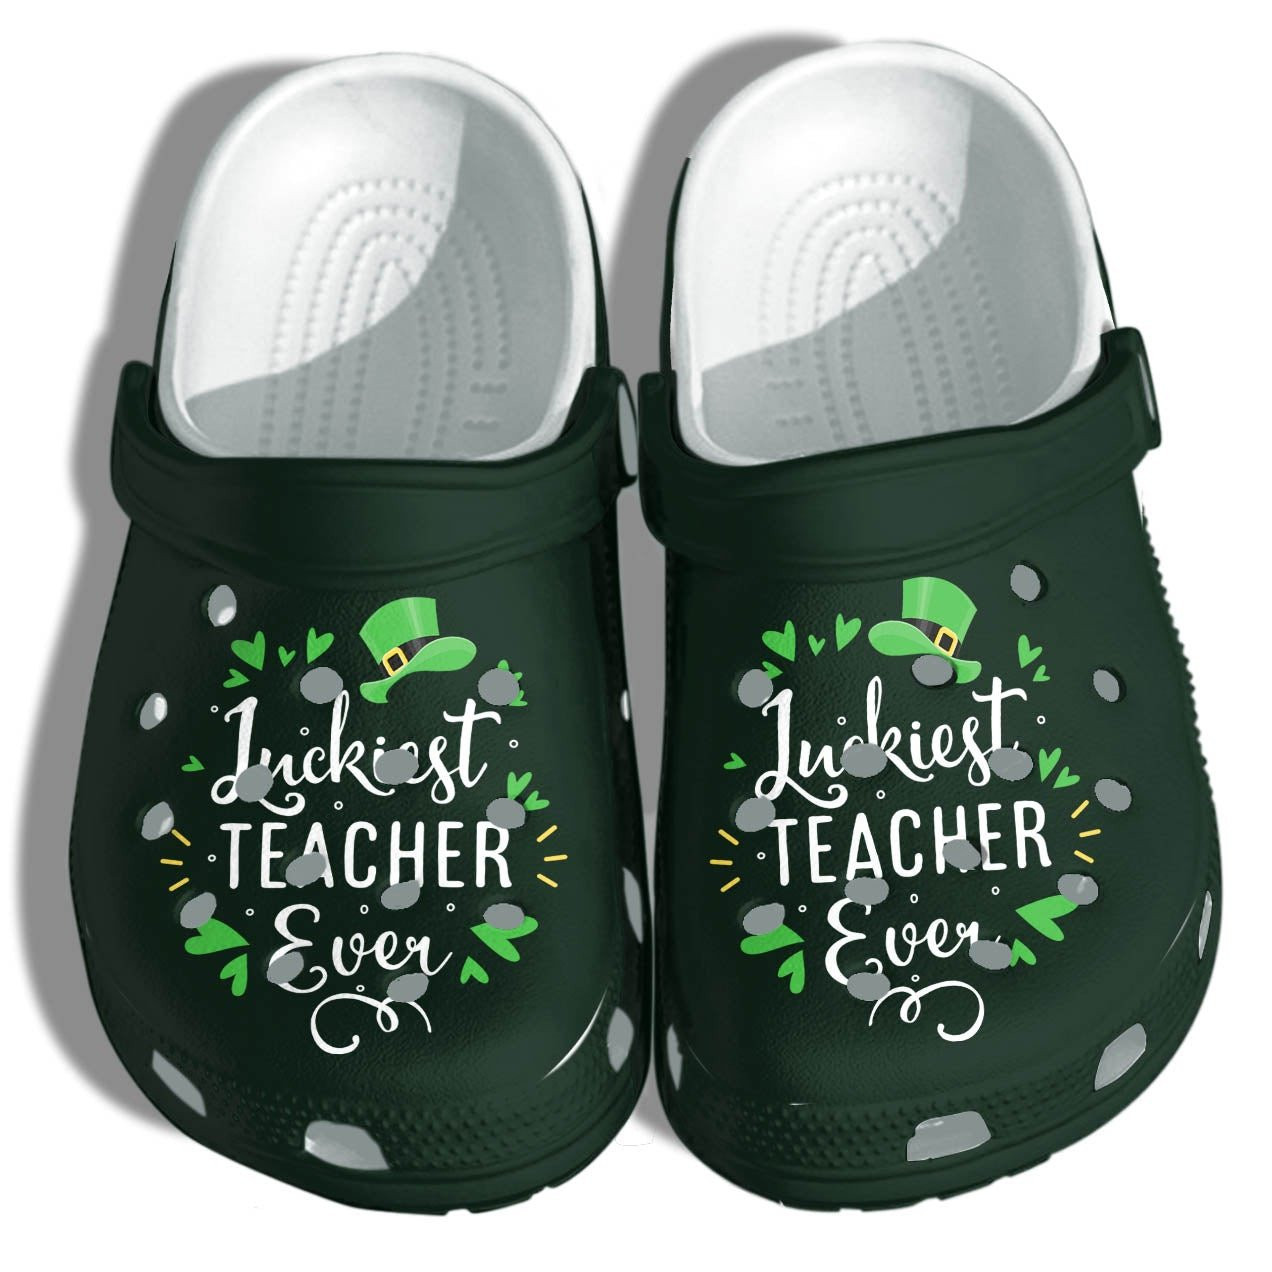 Luckiest Teacher Ever Shoes Crocs Funny Irish Teacher - Funny Shoes Patricks Day Gifts